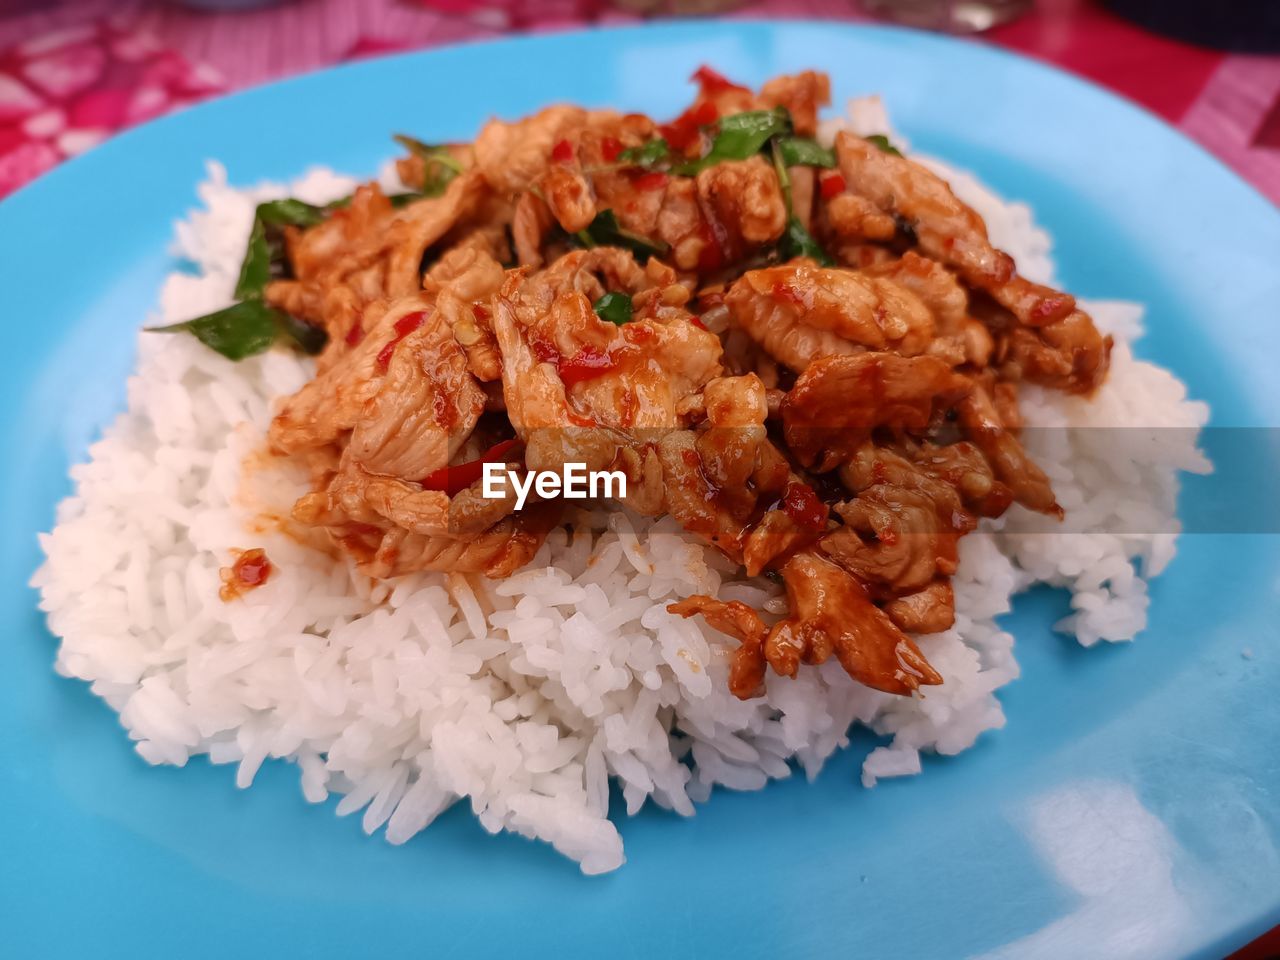 food and drink, food, plate, freshness, dish, healthy eating, asian food, meat, wellbeing, thai food, cuisine, seafood, no people, blue, meal, close-up, indoors, rice - food staple, serving size, restaurant, table, fried, vegetable, produce, fish